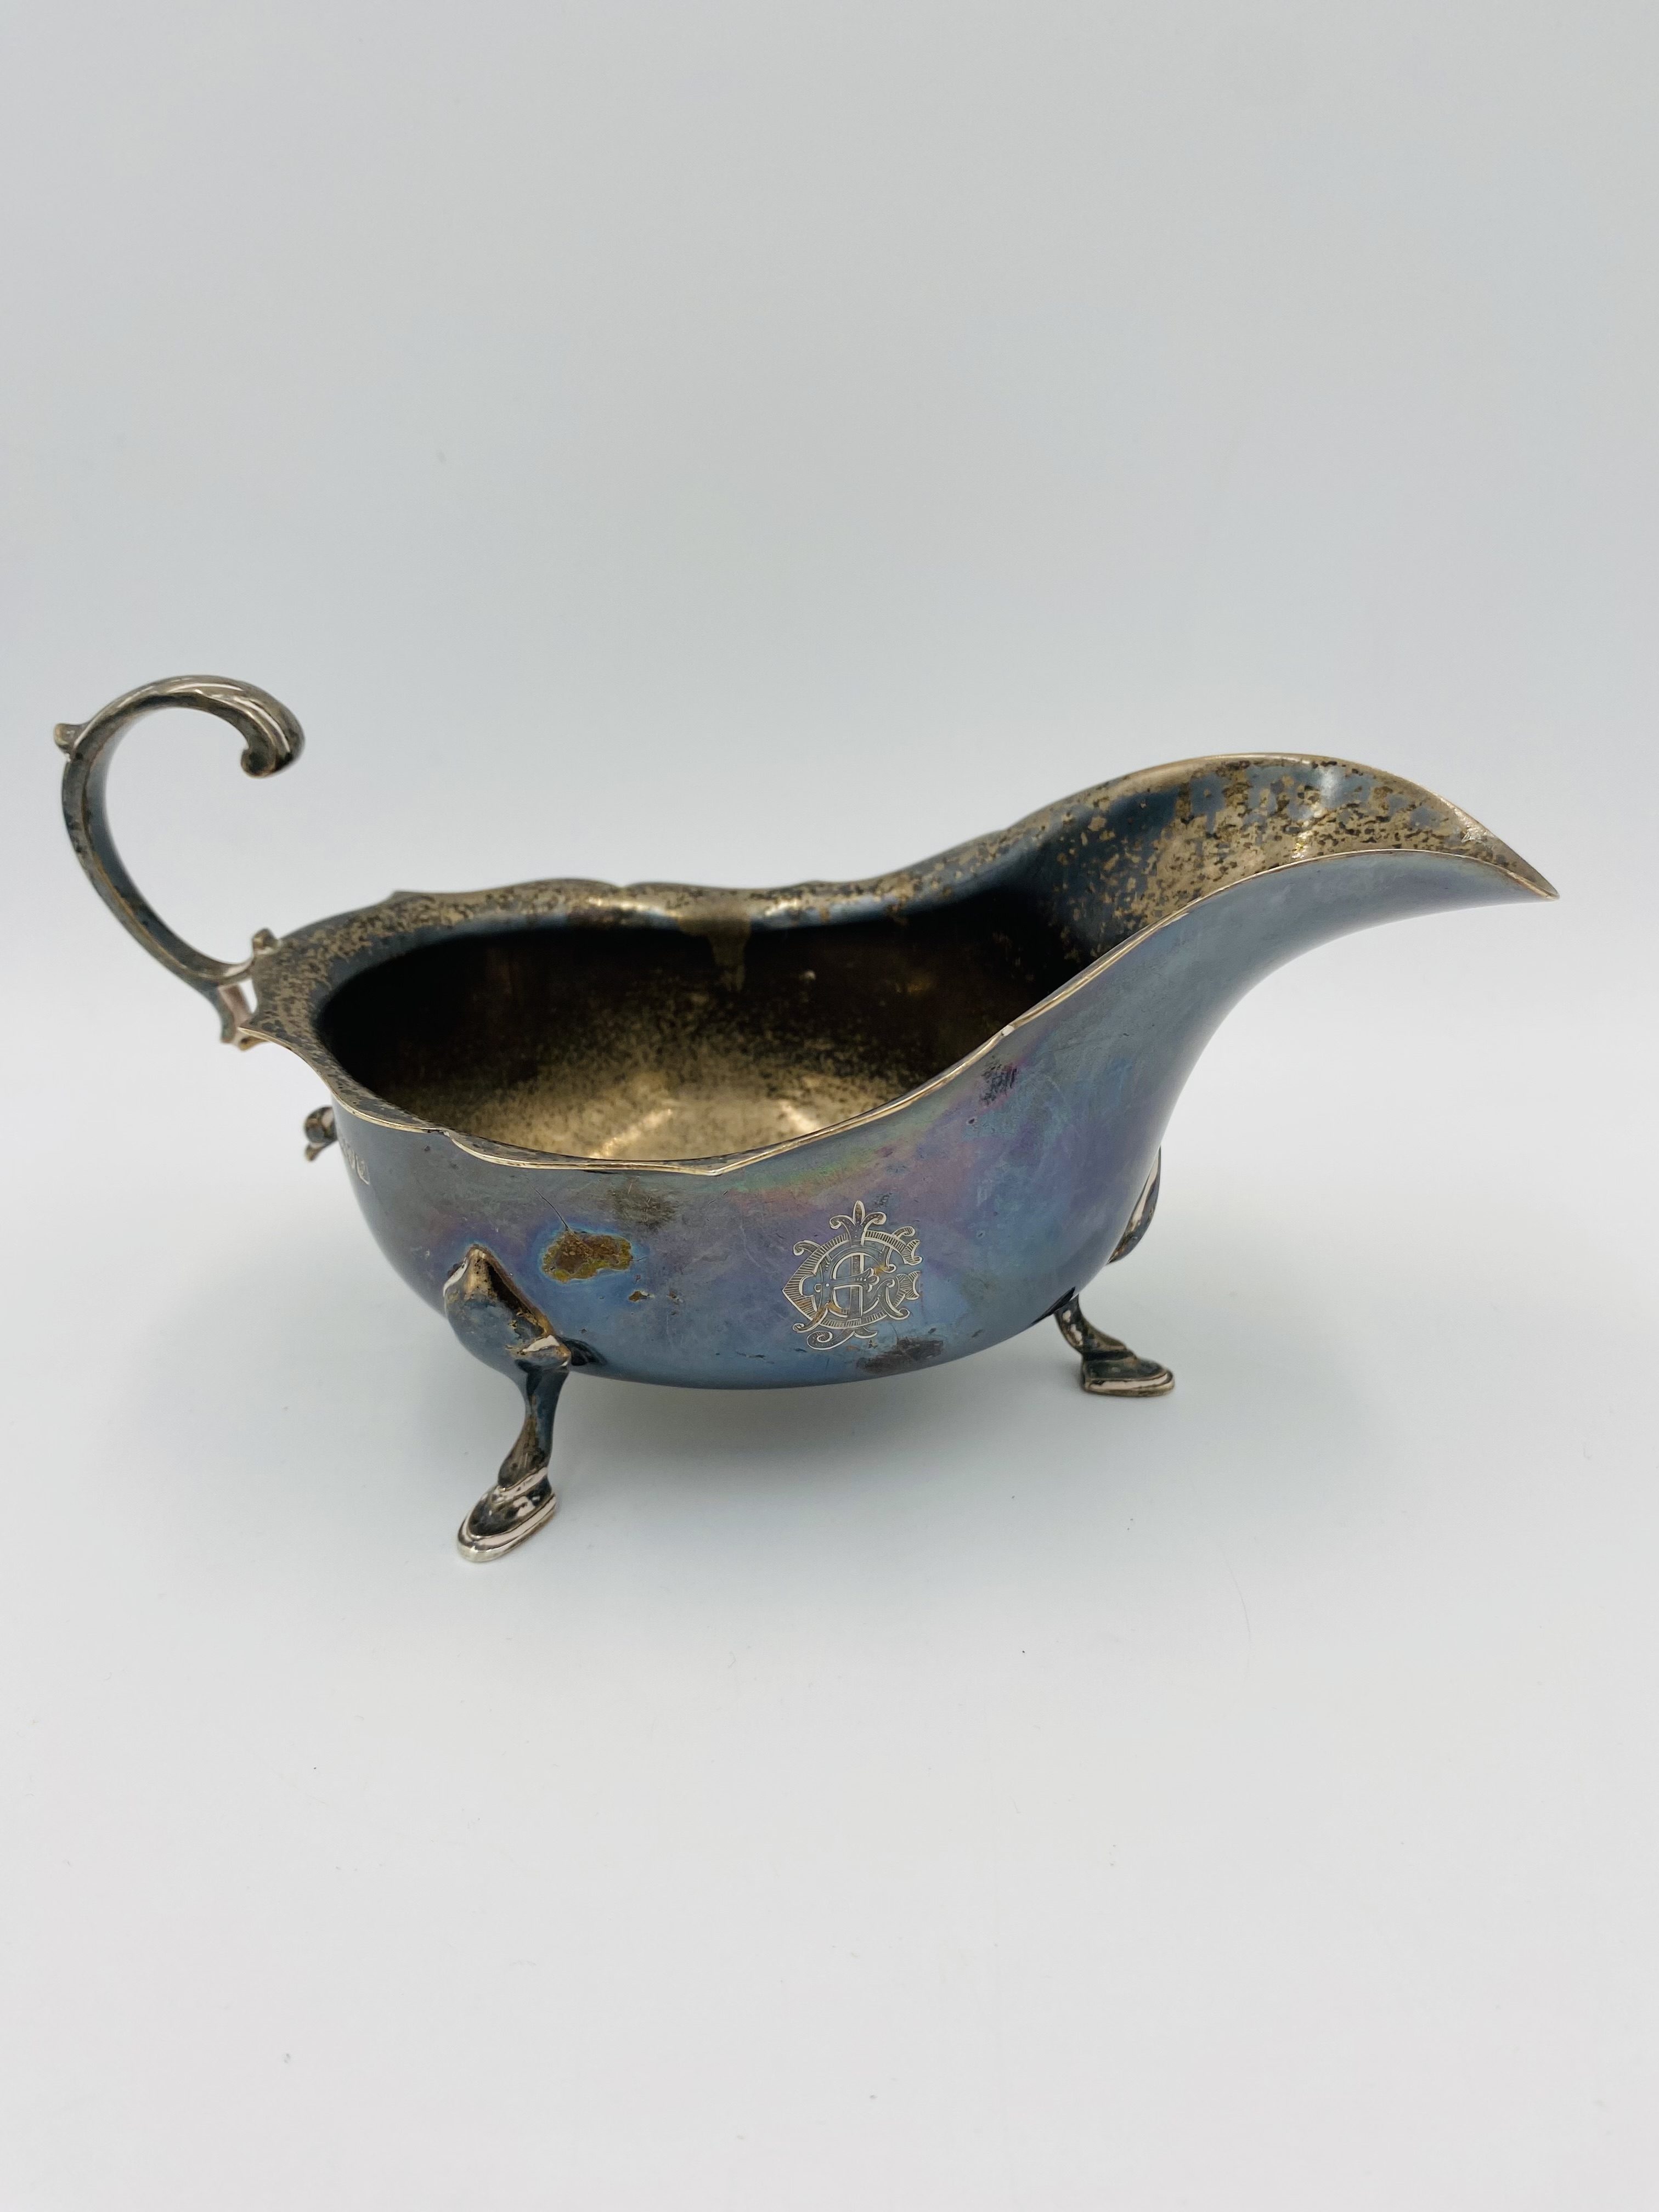 Silver sauce boat - Image 2 of 3